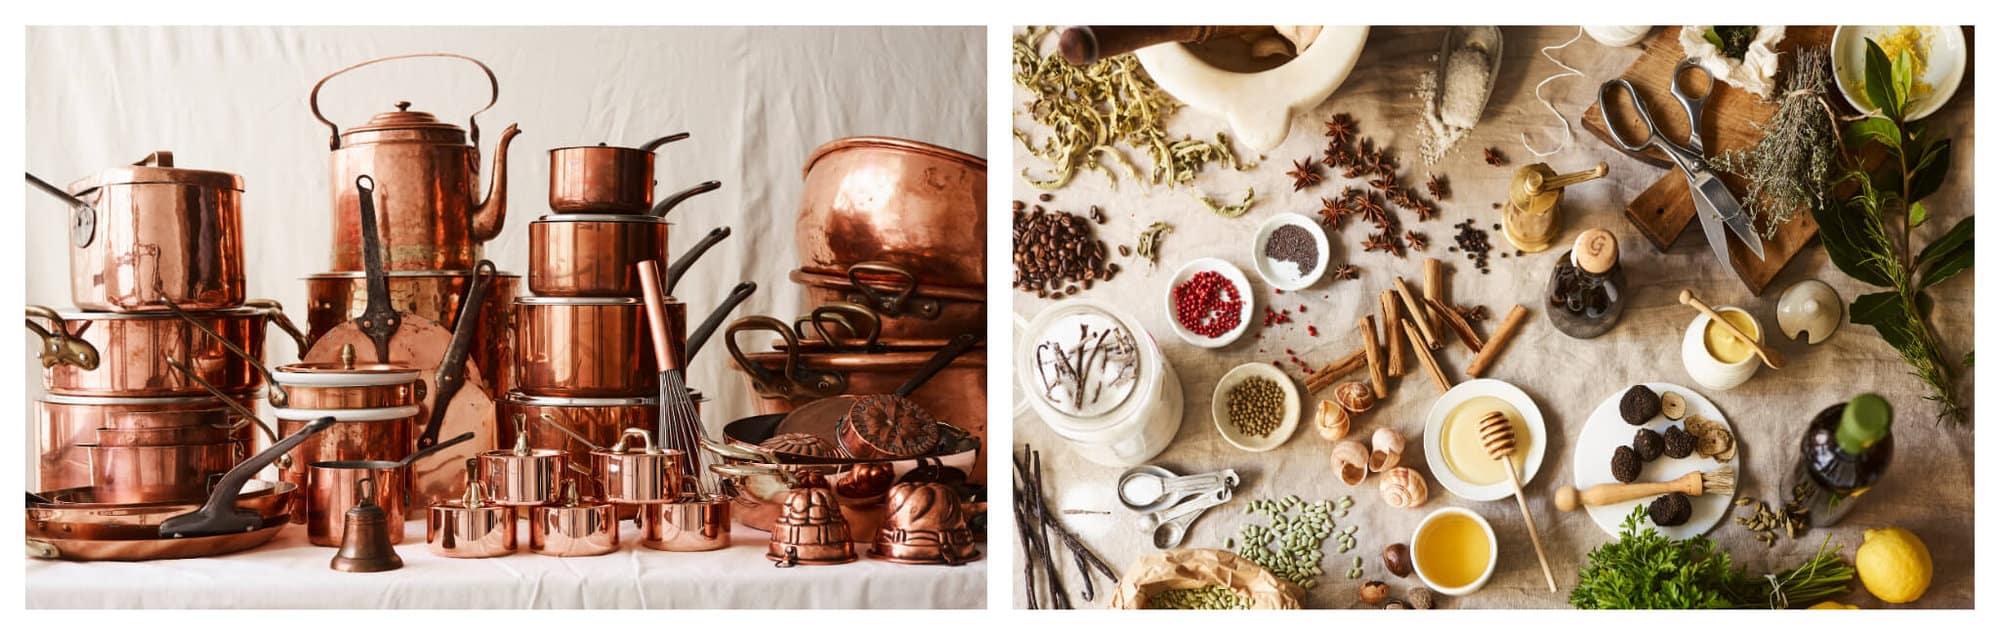 Left: Several copper kitchen utensils (pans, whisks, teapots) are pictured in front of a white linen backdrop. Right: A table-full of fruit, honey, seeds, and flowers is pictured from above.